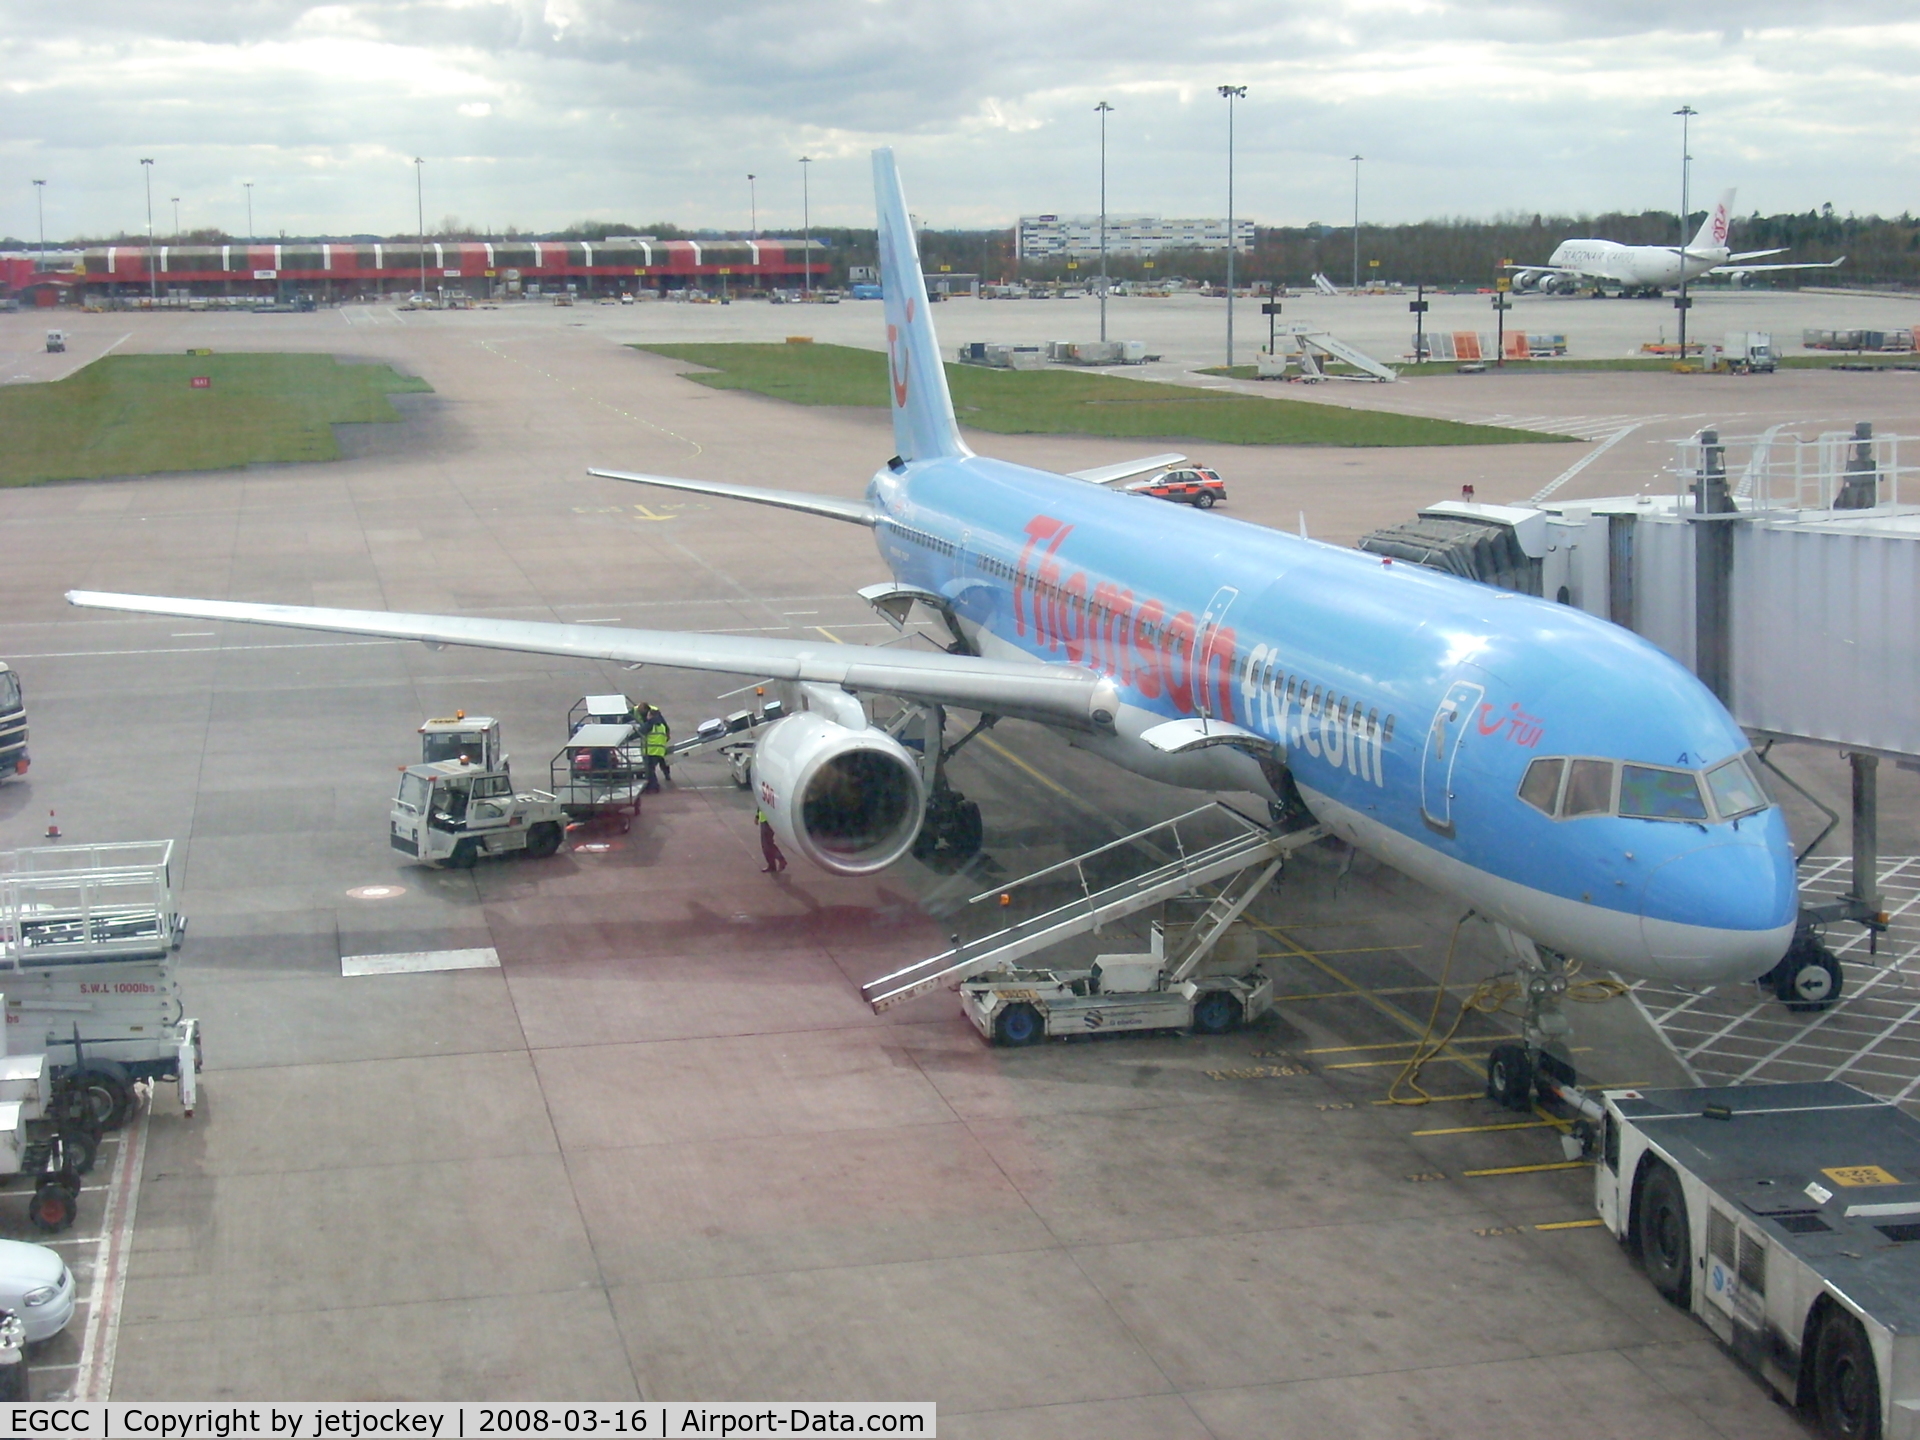 Manchester Airport, Manchester, England United Kingdom (EGCC) - Boeing 757 being prepared for a flight to Tenerife